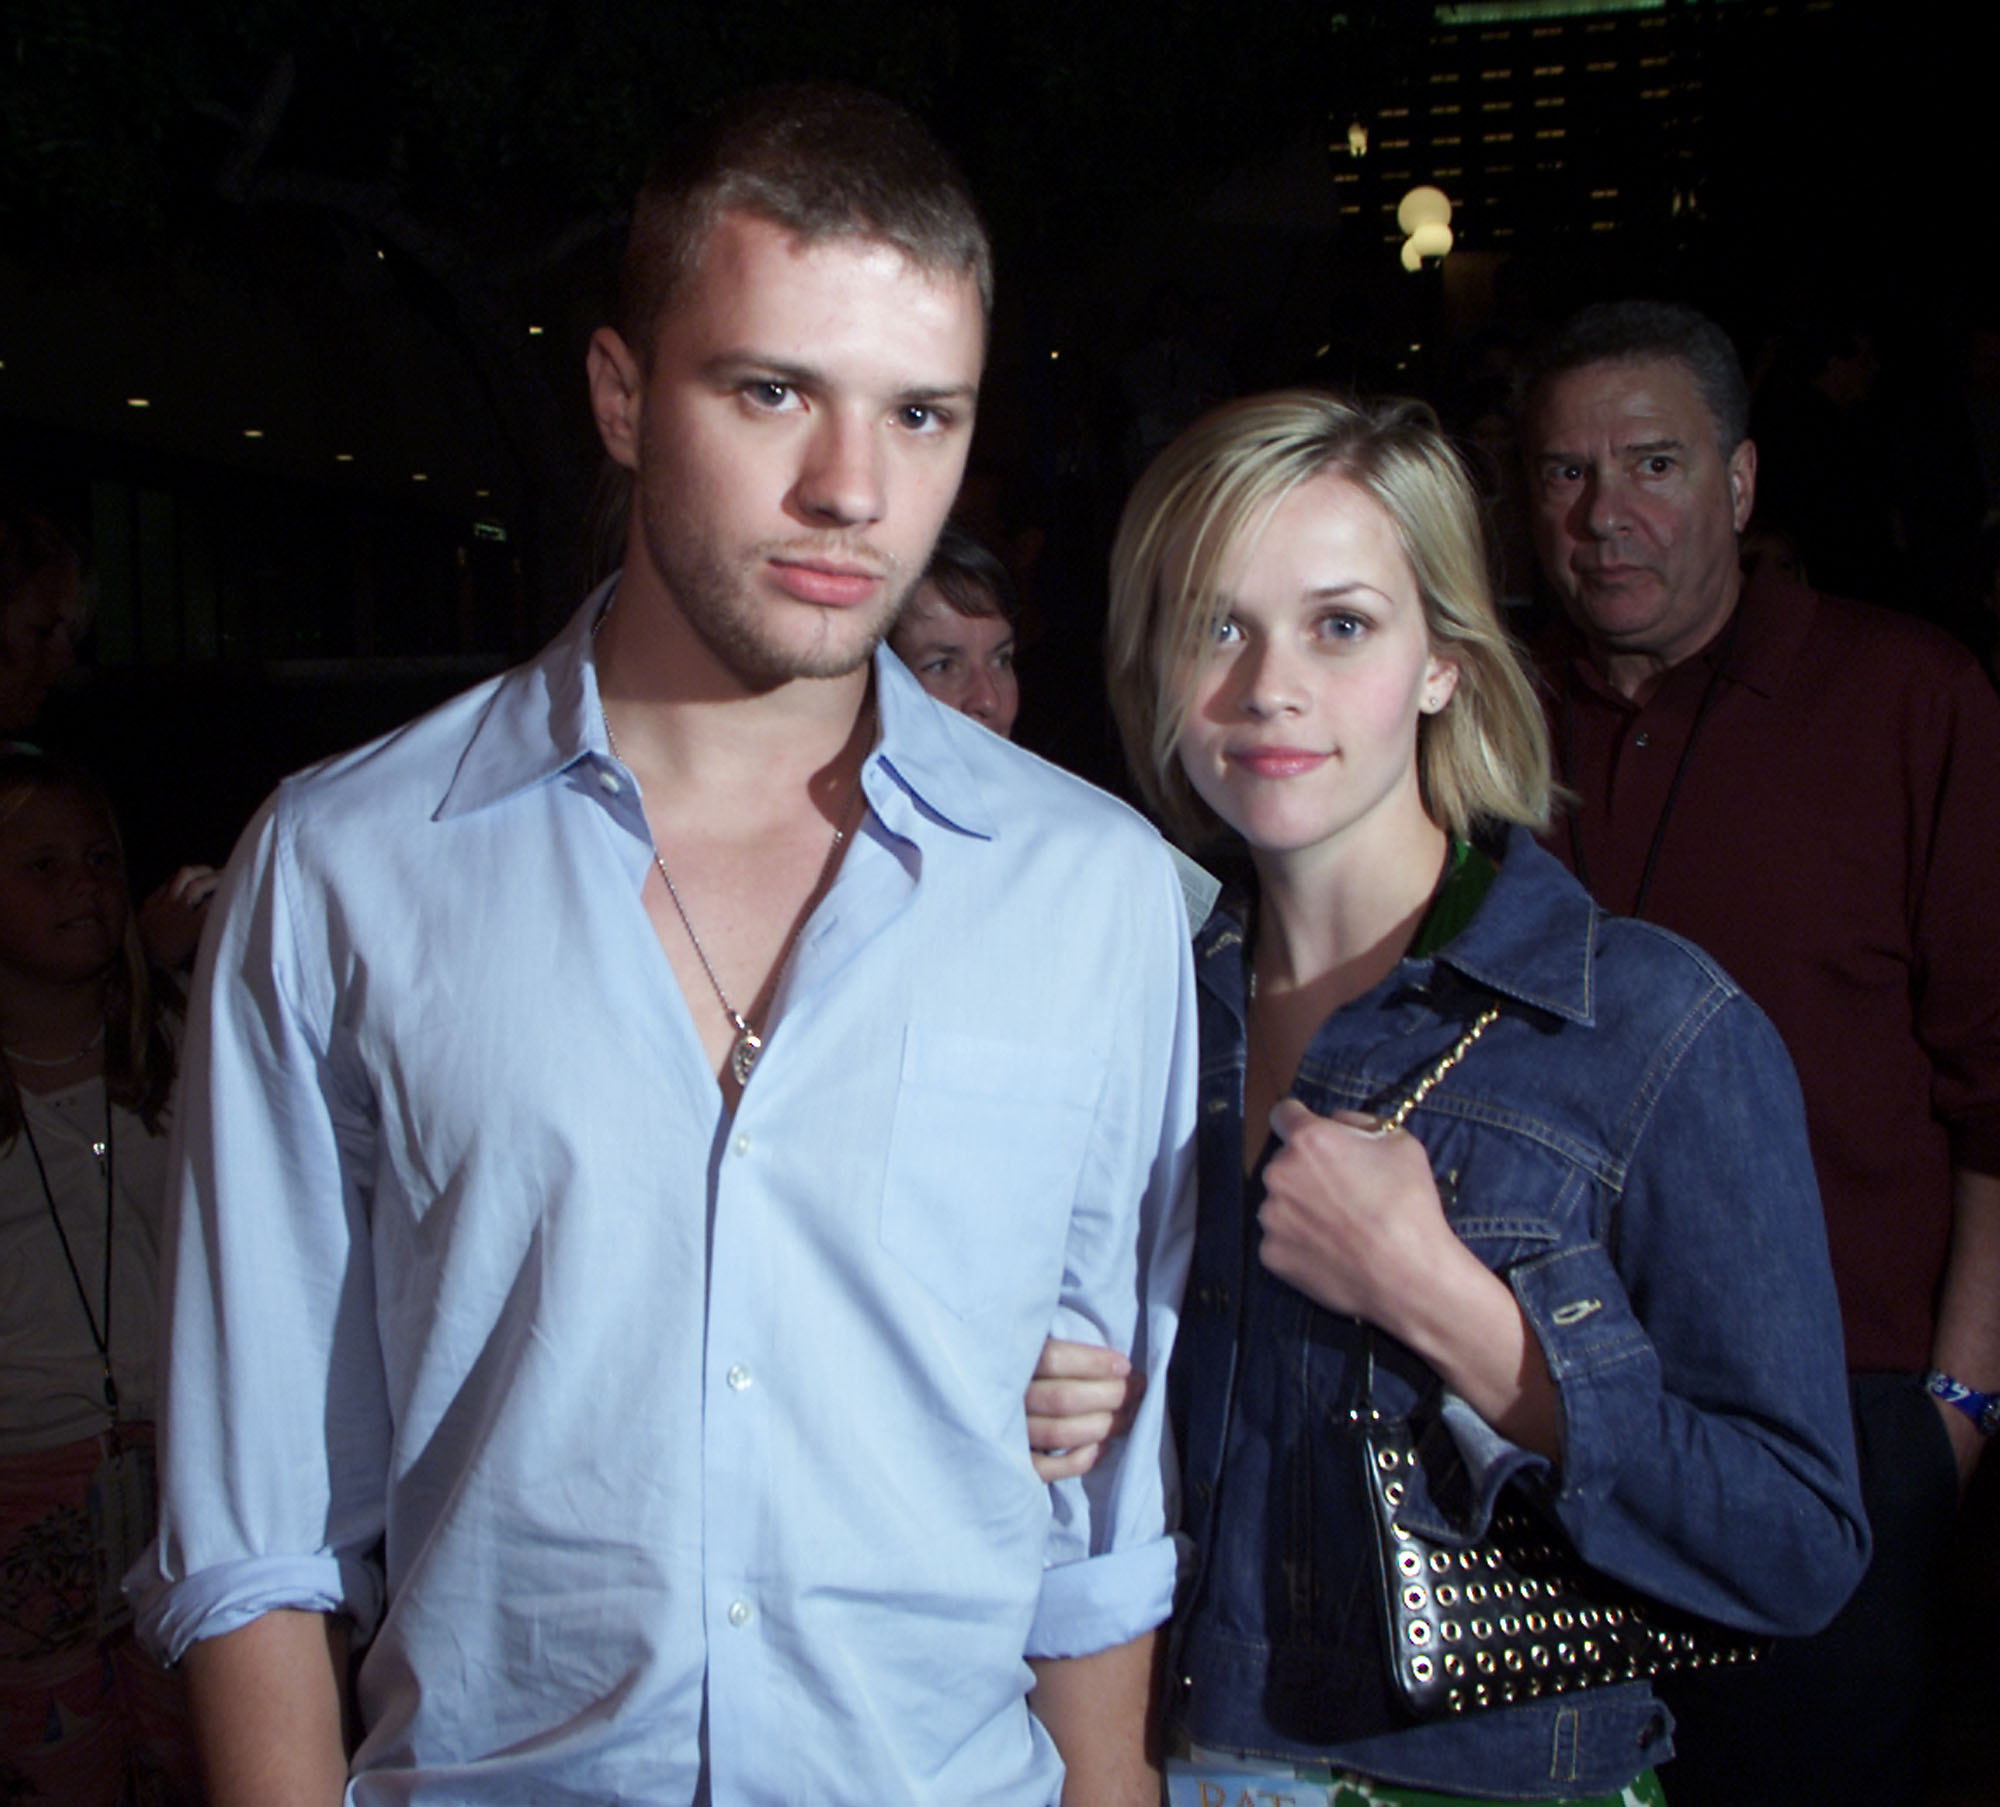 Ryan Phillippe and Reese Witherspoon at the premiere of "Rat Race" at the Cineplex Odeon Century Plaza in Los Angeles, Ca. 7/30/01. | Source: Getty Images